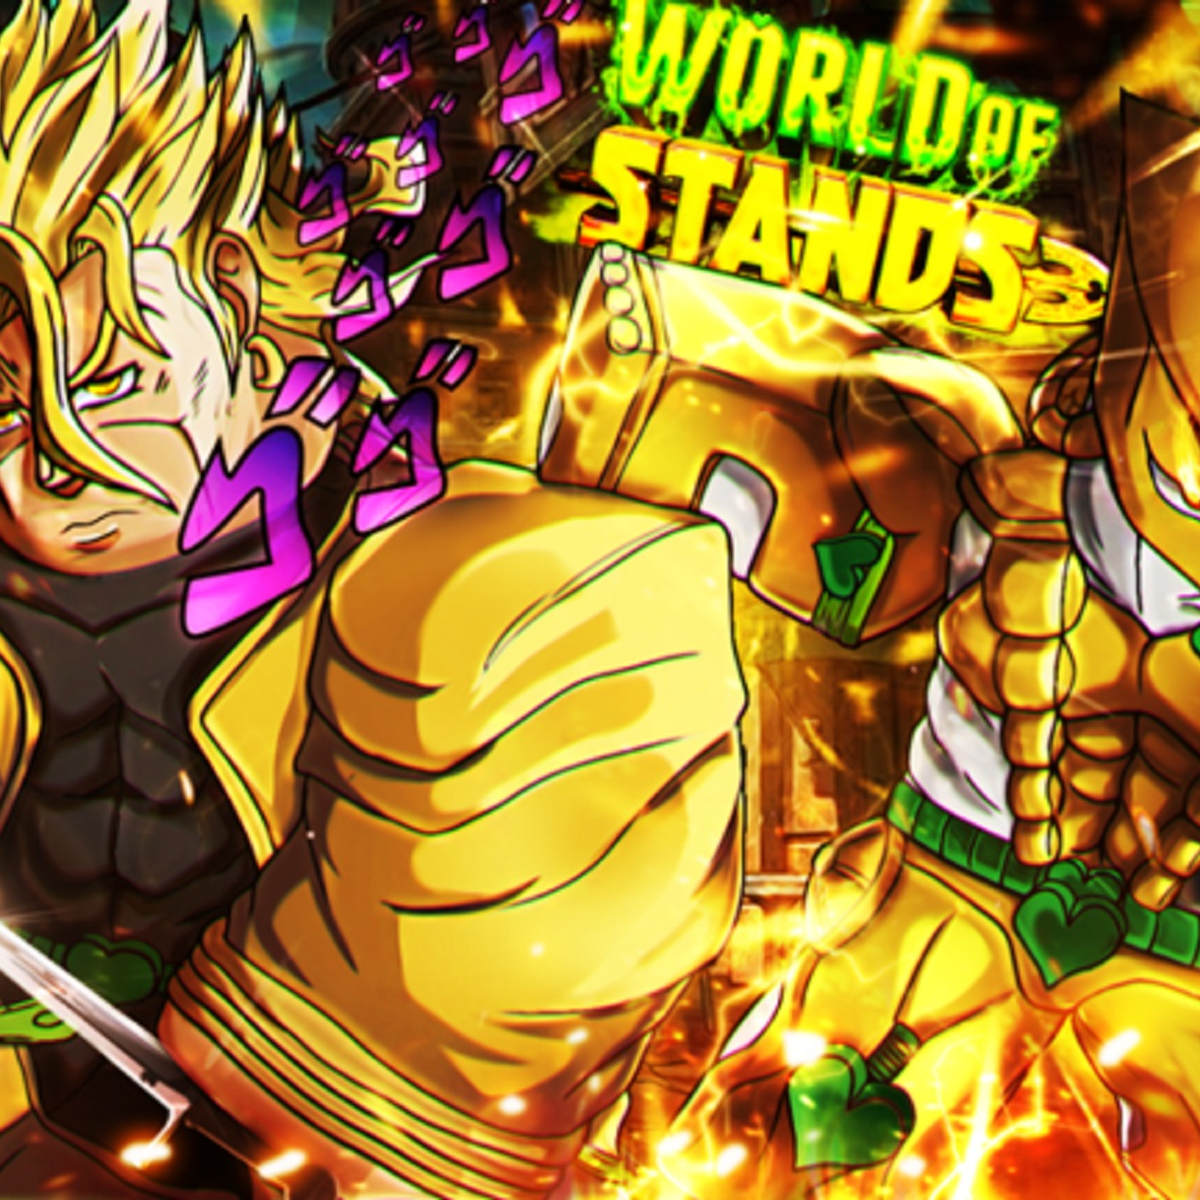 World Of Stands codes [December 2023]